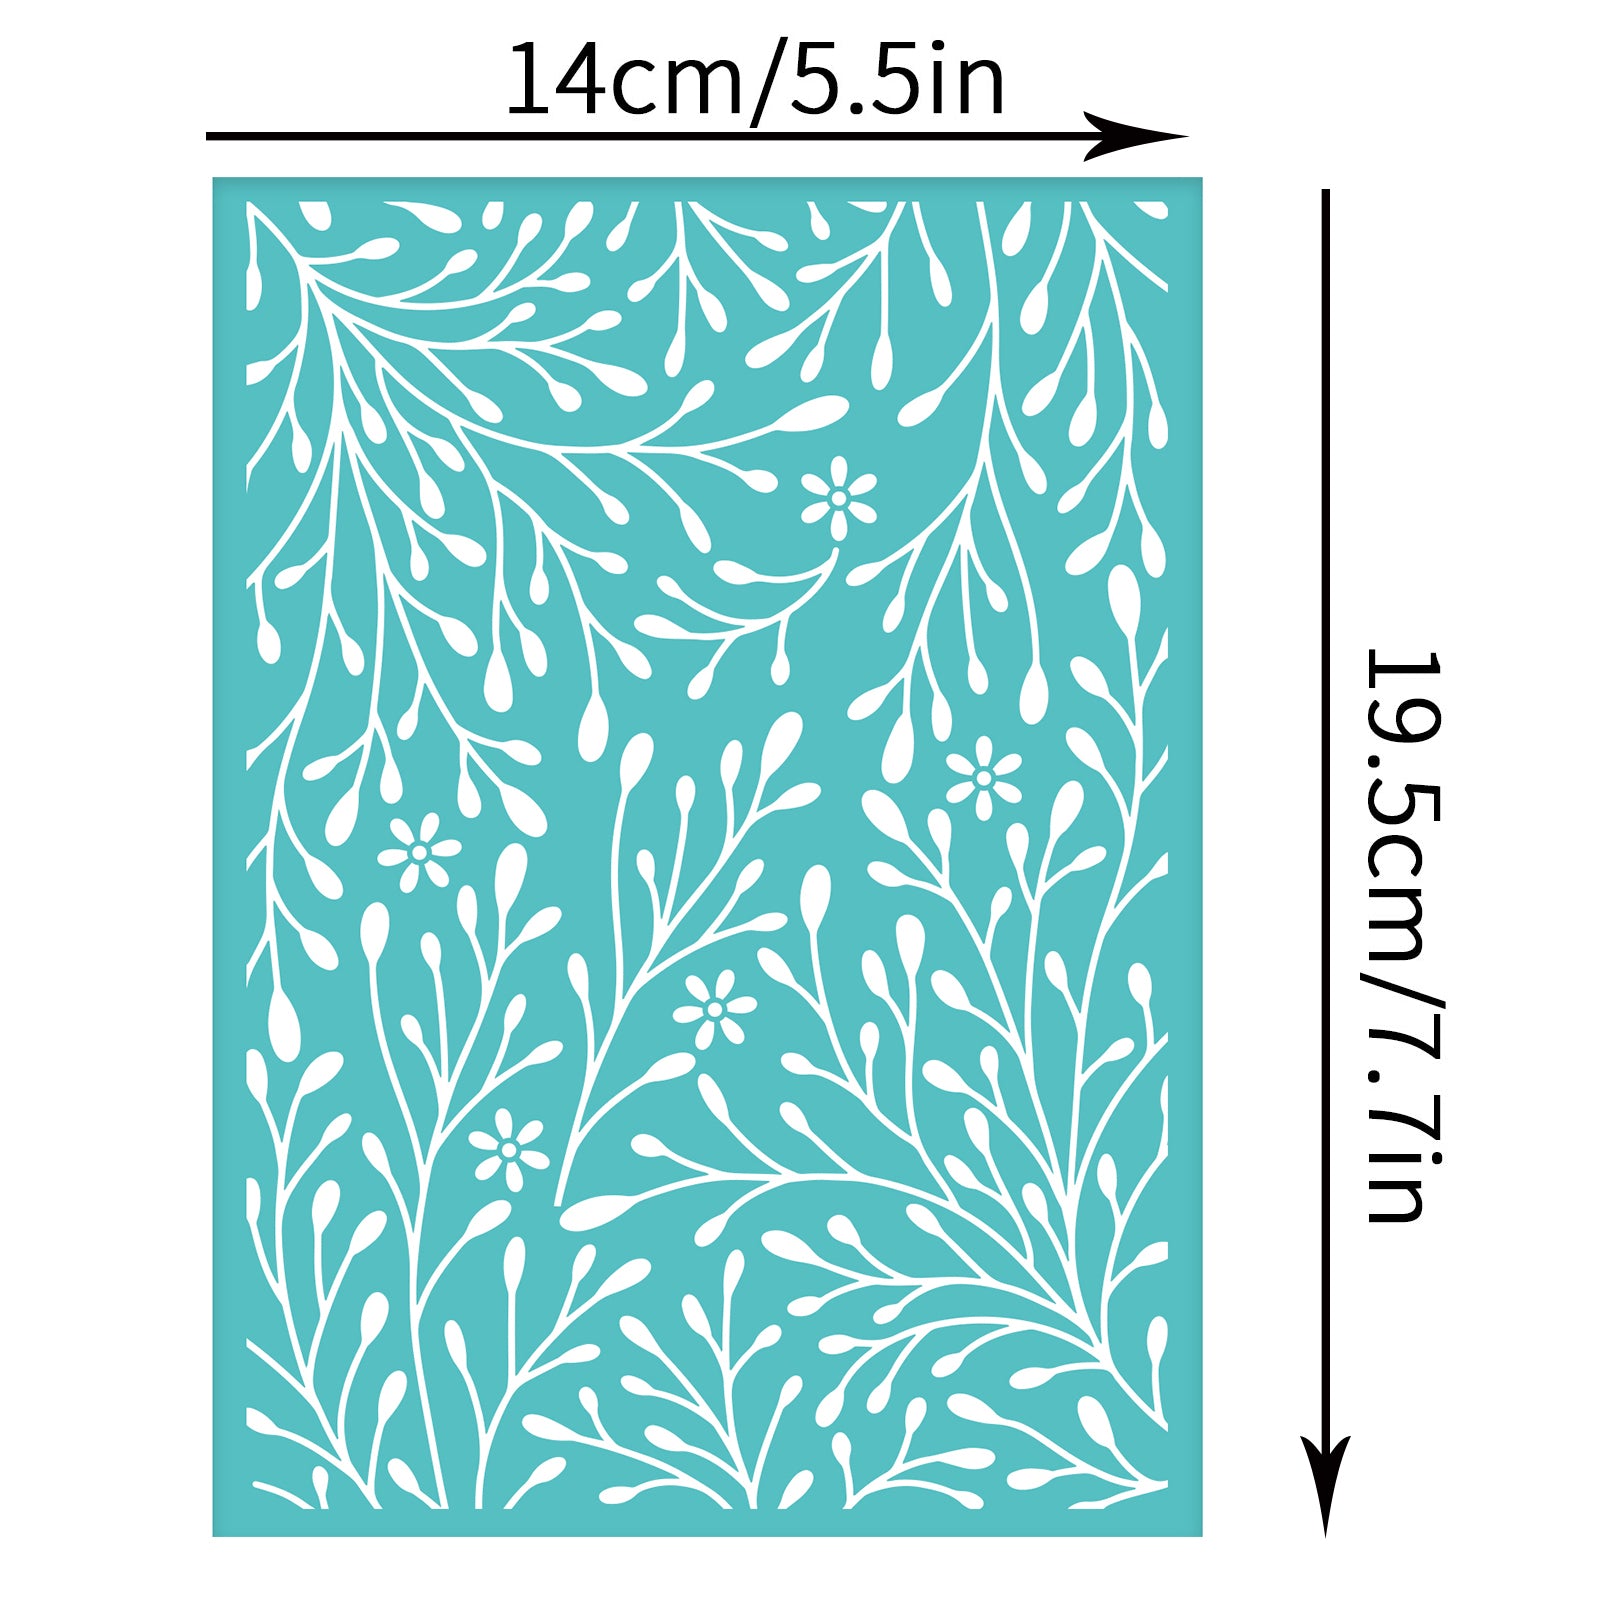 Globleland Self-Adhesive Silk Screen Printing Stencil, for Painting on Wood, DIY Decoration T-Shirt Fabric, Turquoise, Leaf Pattern, 195x140mm